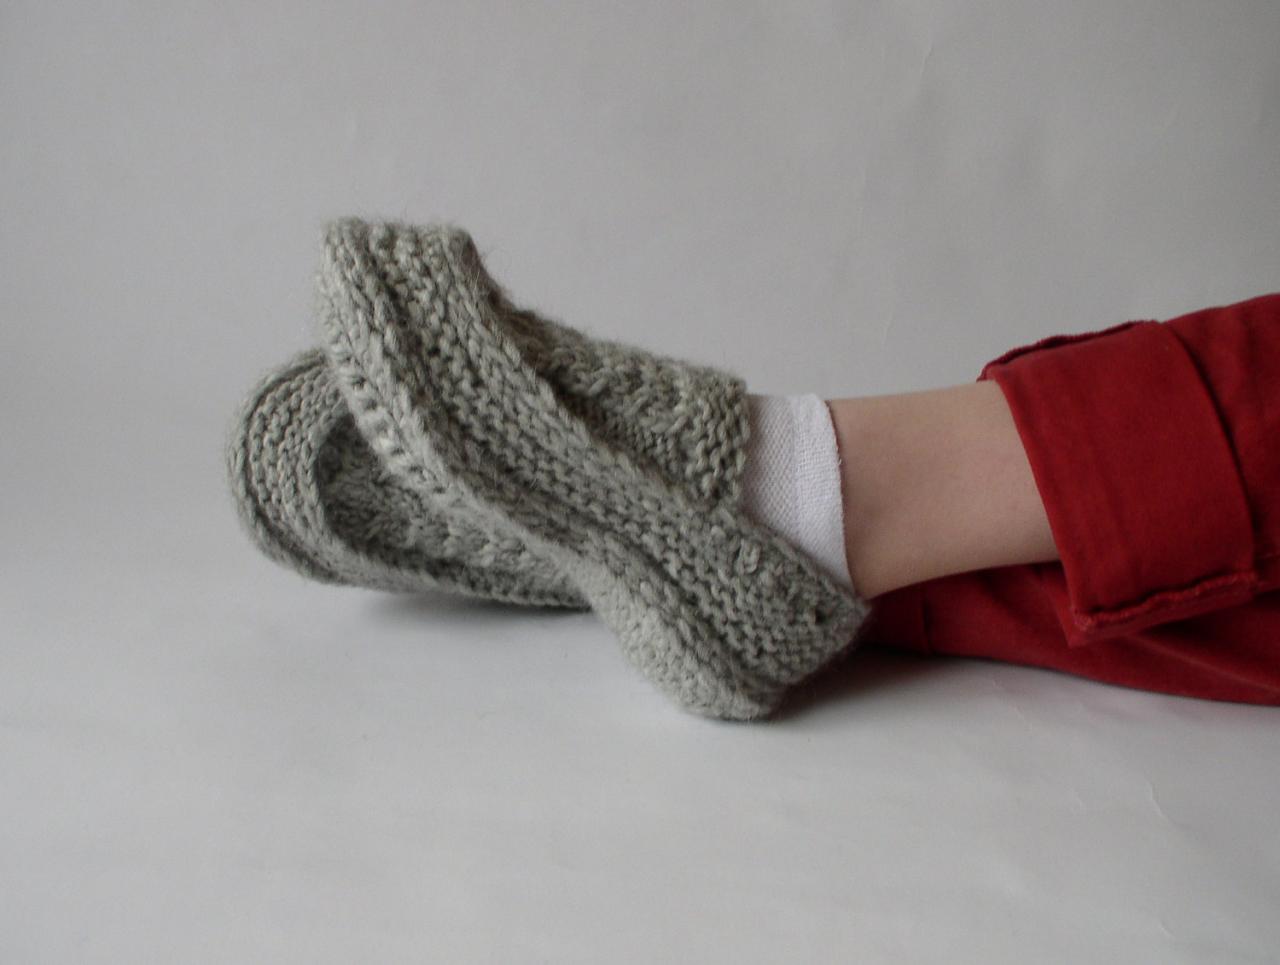 Knit Crochet Socks/slippers In Natural Grey With Irish Traditional Aran Knitting Cables Motifs, Hand Knitted Women Home Shoes